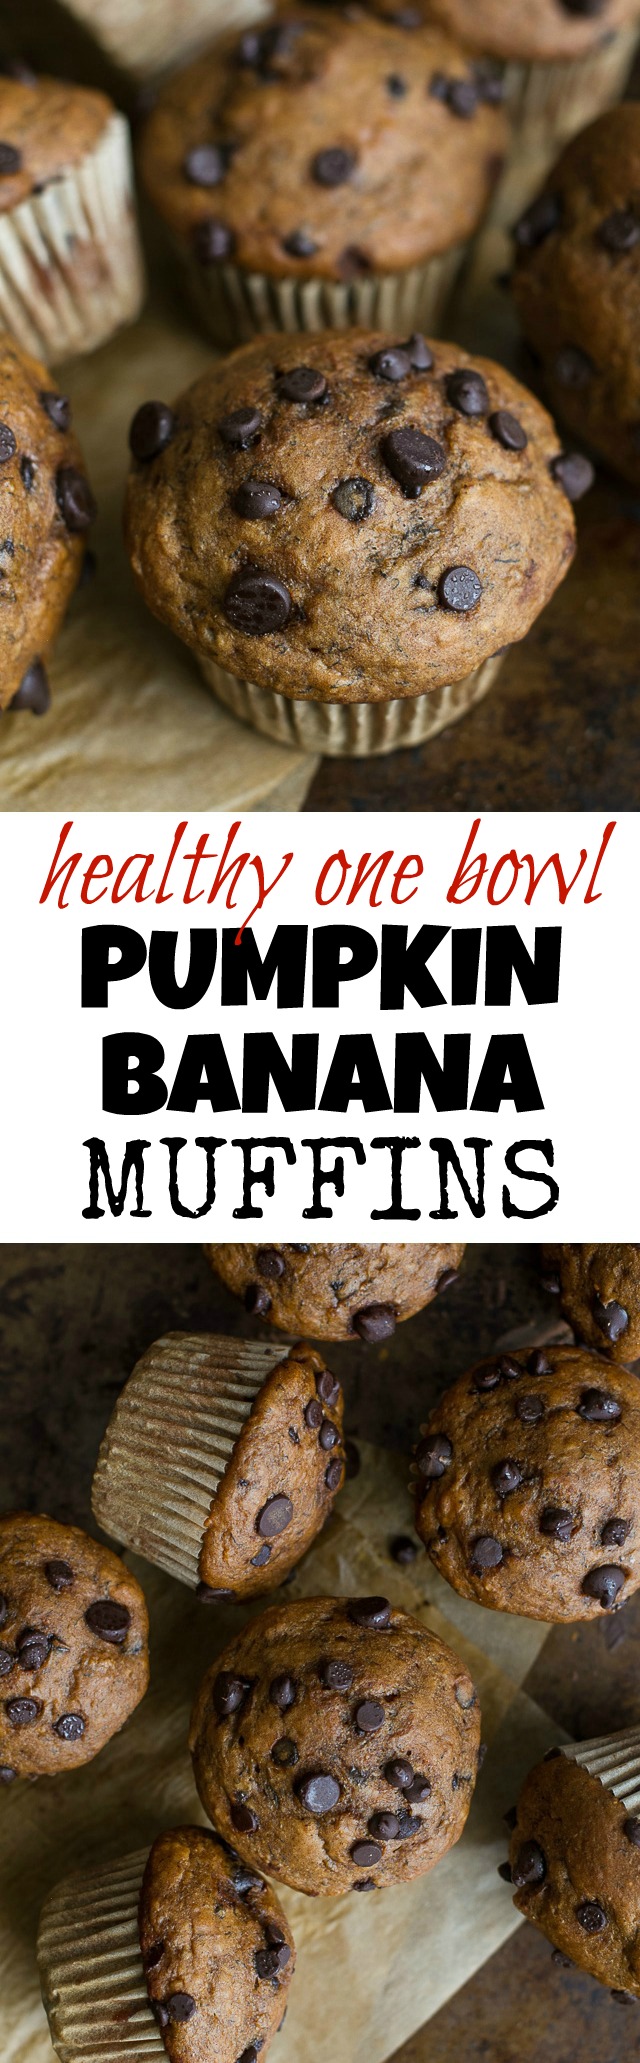 One Bowl Pumpkin Banana Muffins to help you use up overripe bananas and leftover canned pumpkin! Not quite pumpkin muffins, not quite banana muffins, they combine hints of both to create healthy muffins that are naturally sweetened and loaded with flavour  | runningwithspoons.com